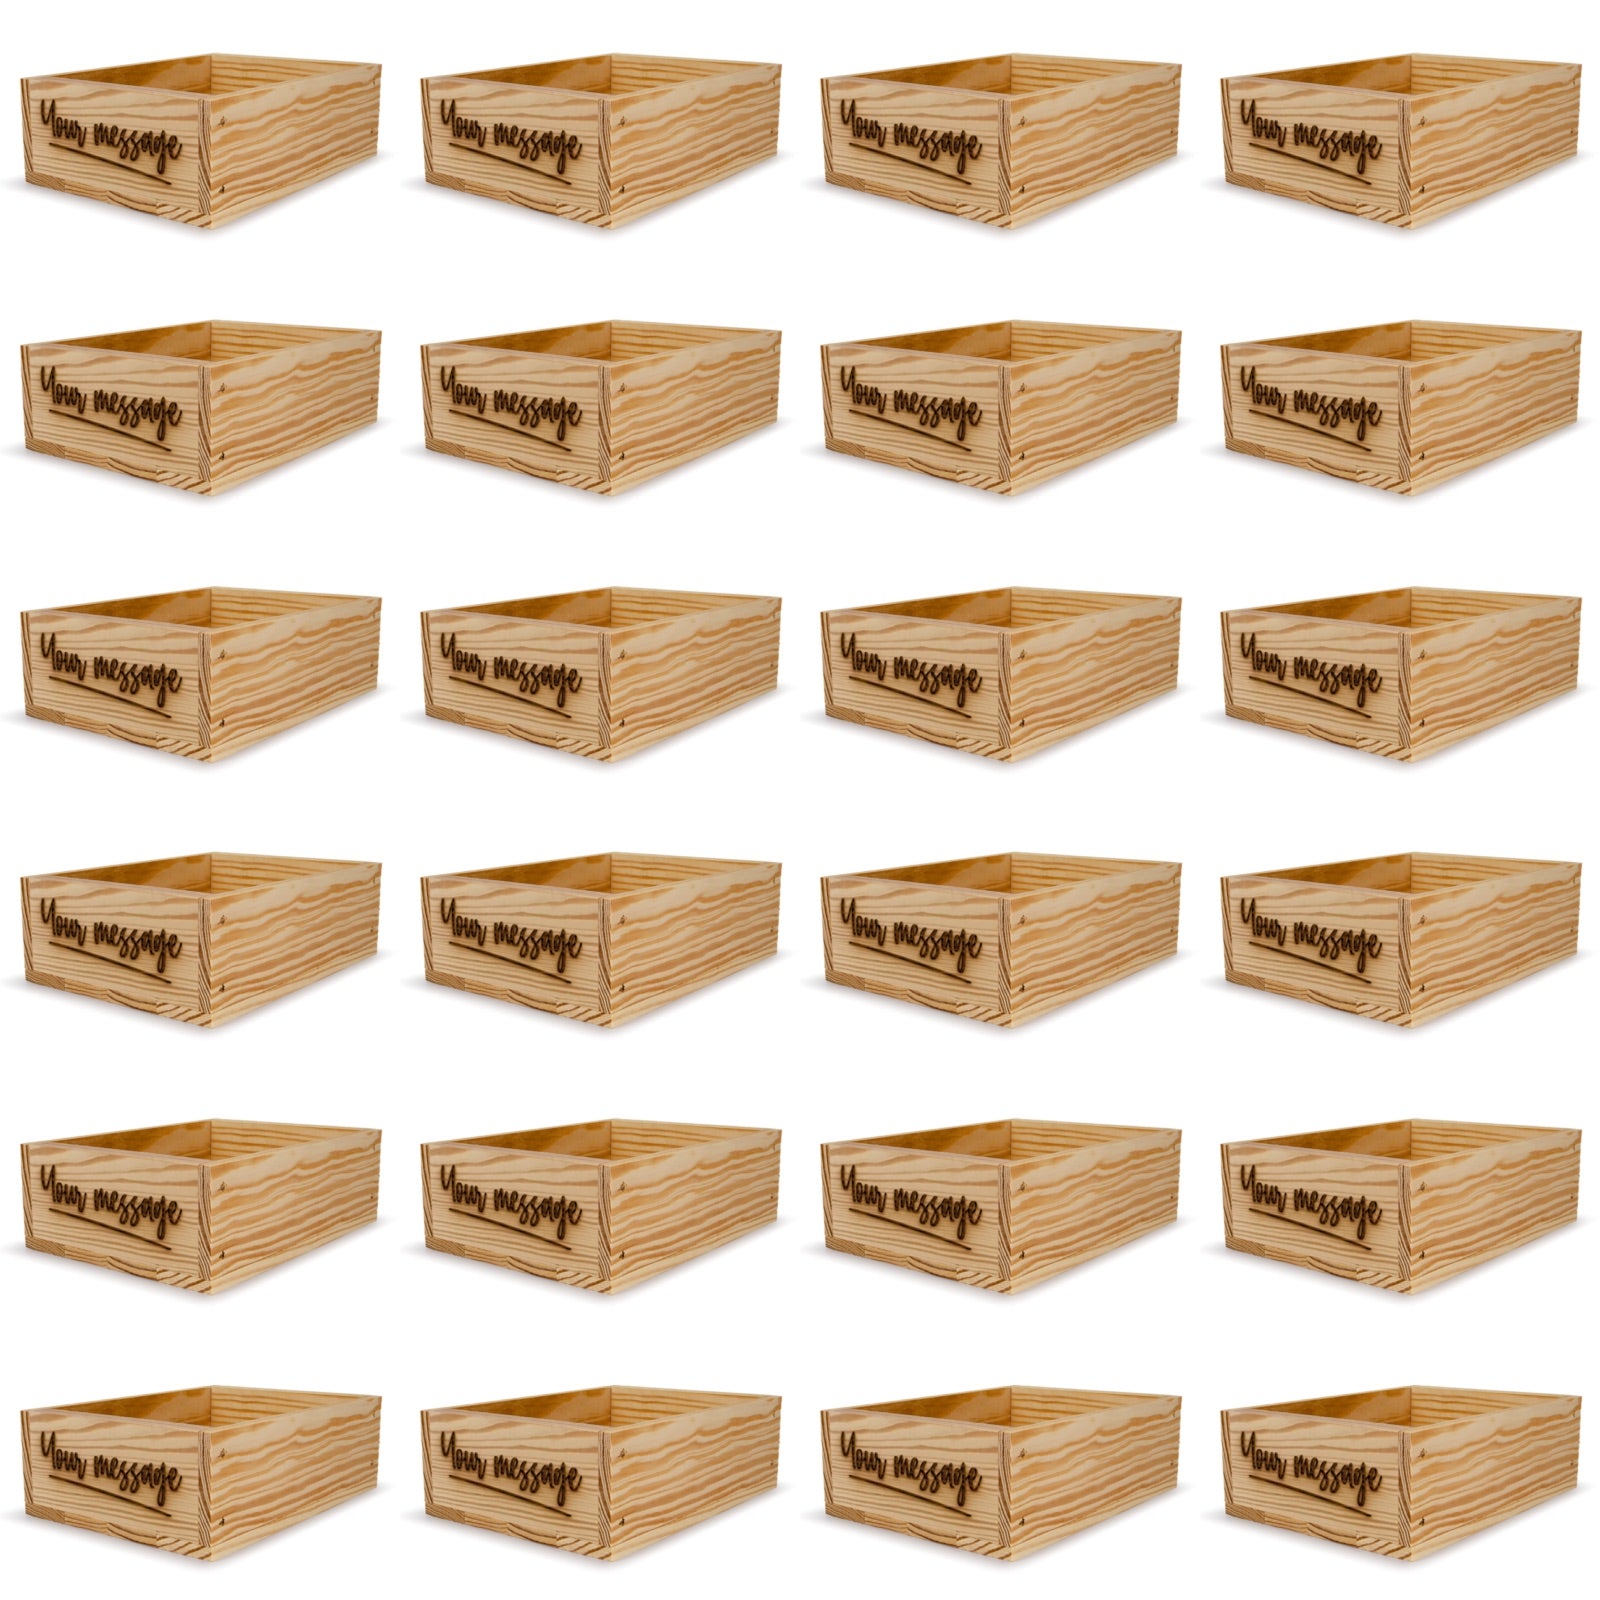 24 Small wooden crates with custom message 8x6.25x2.75